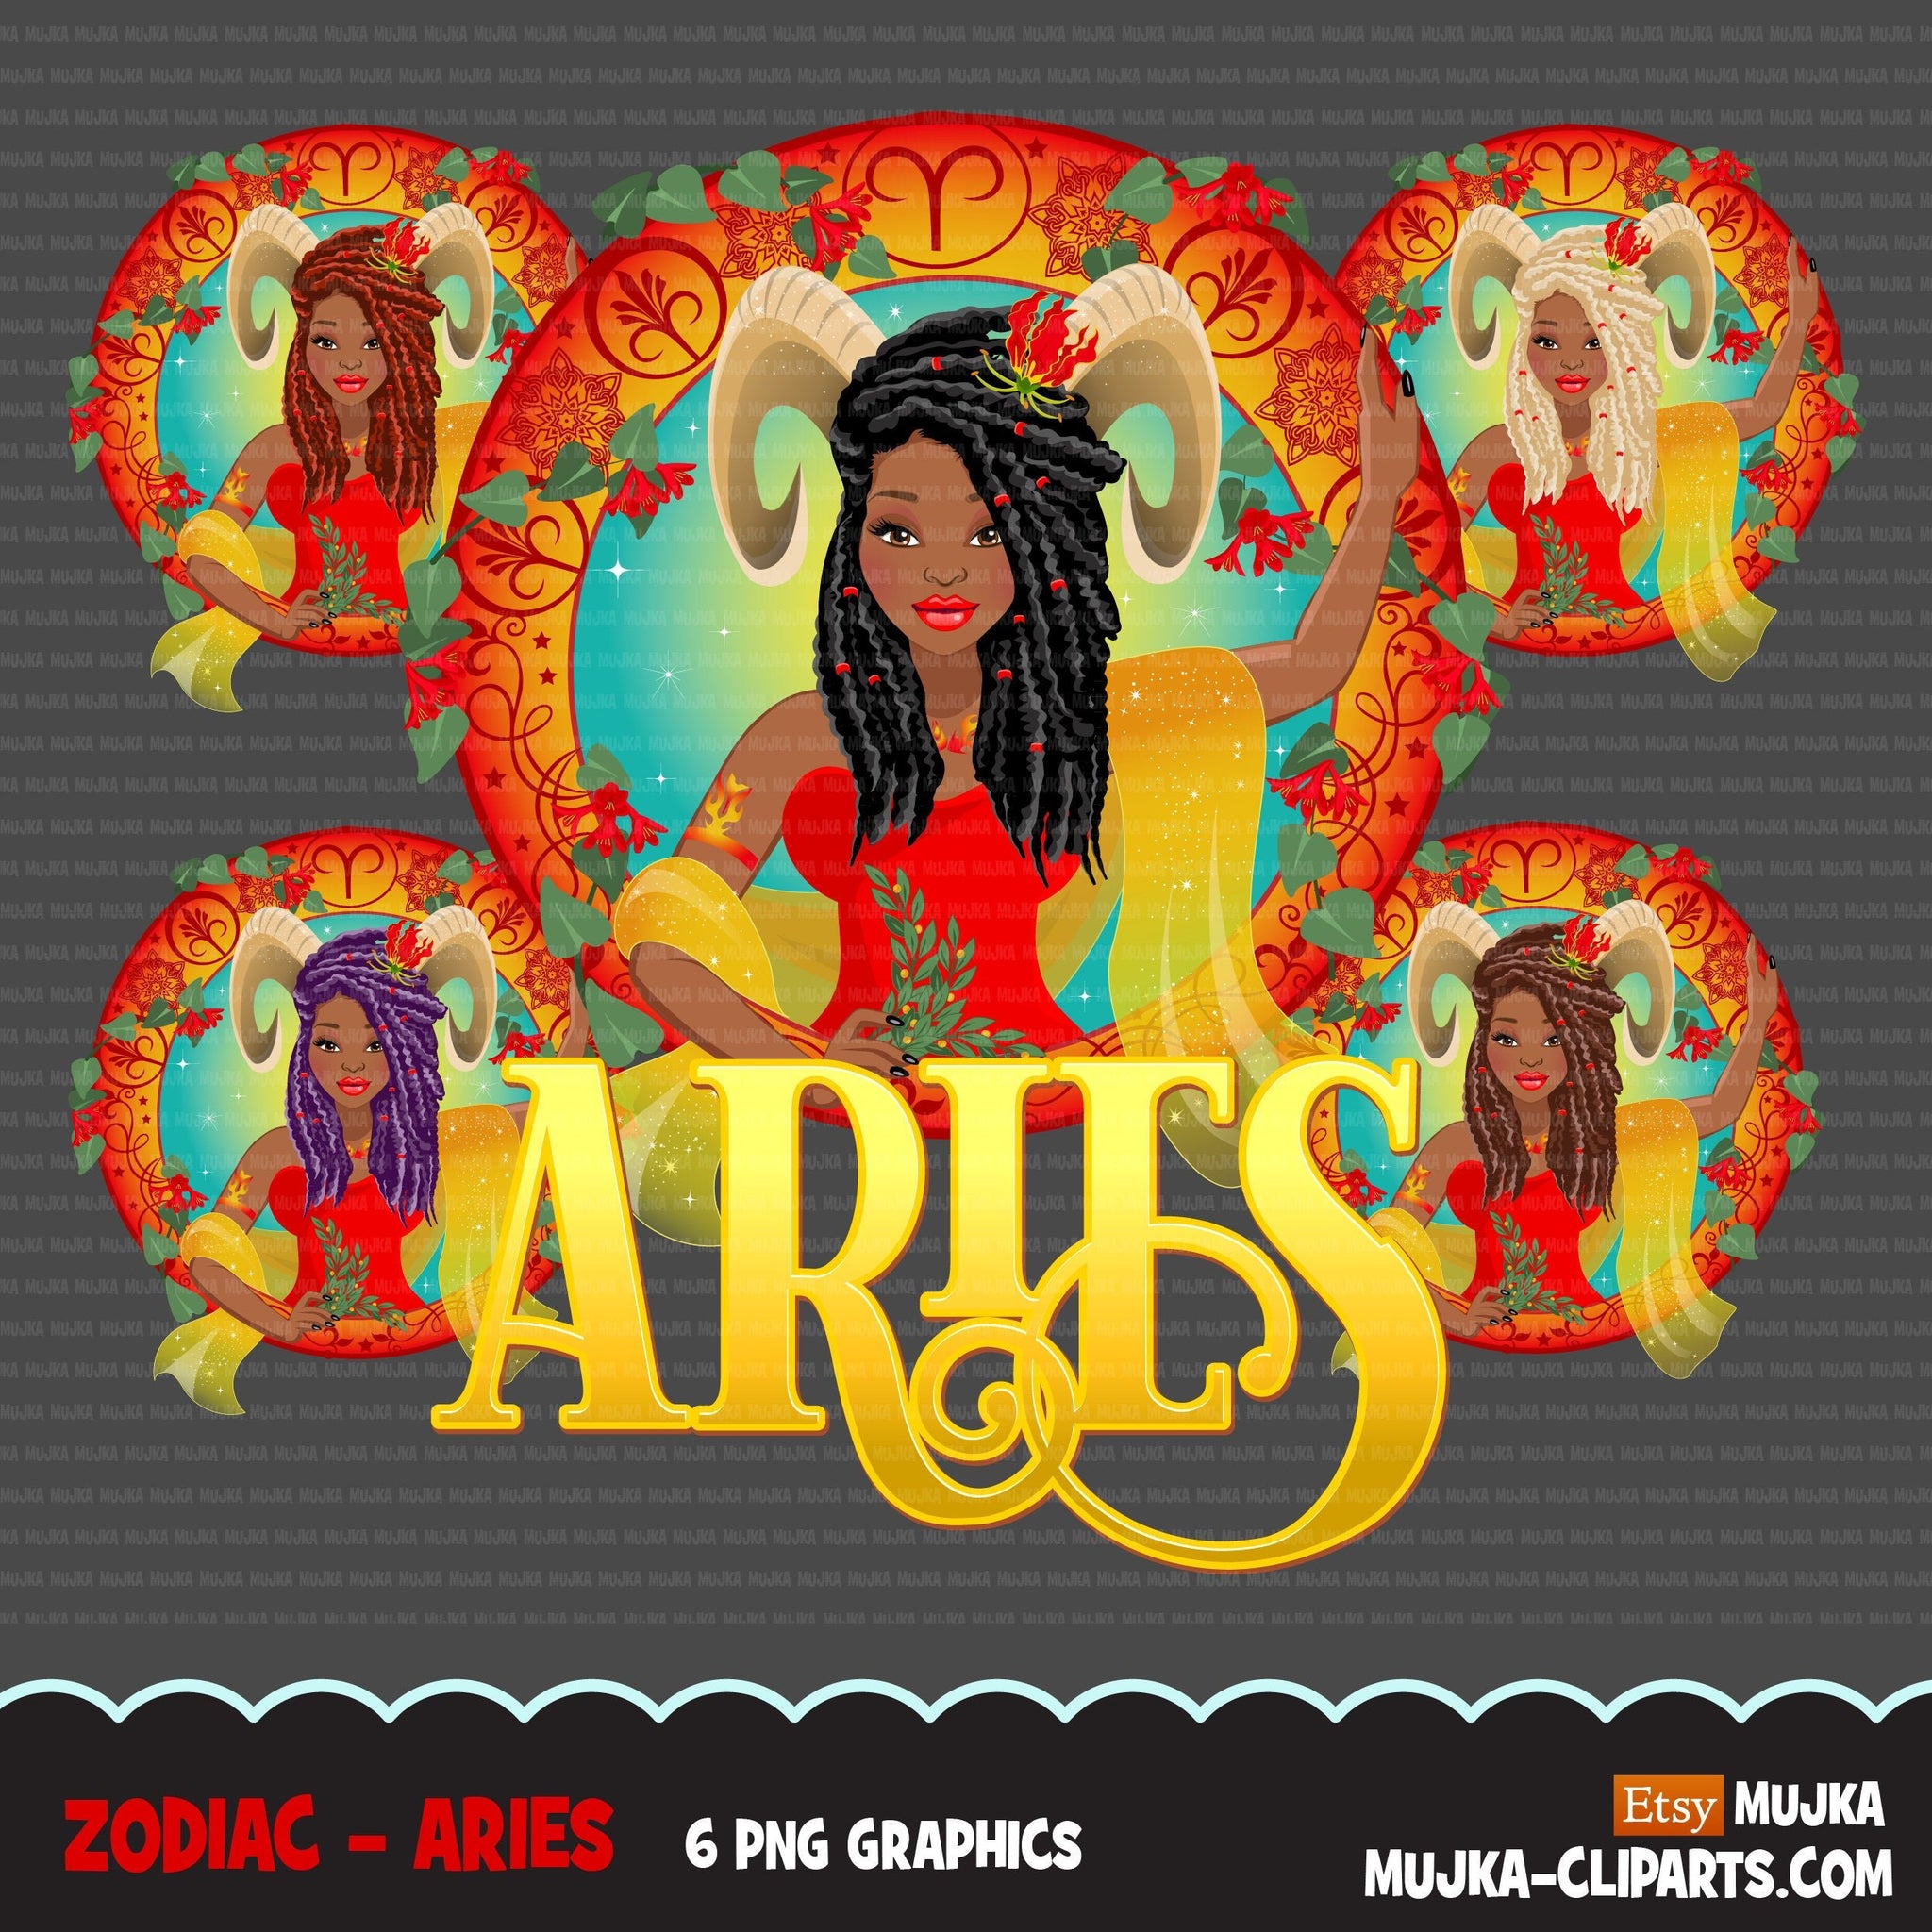 Zodiac Aries Clipart, Png digital download, Sublimation Graphics for Cricut & Cameo, Black Braids Woman Horoscope sign designs